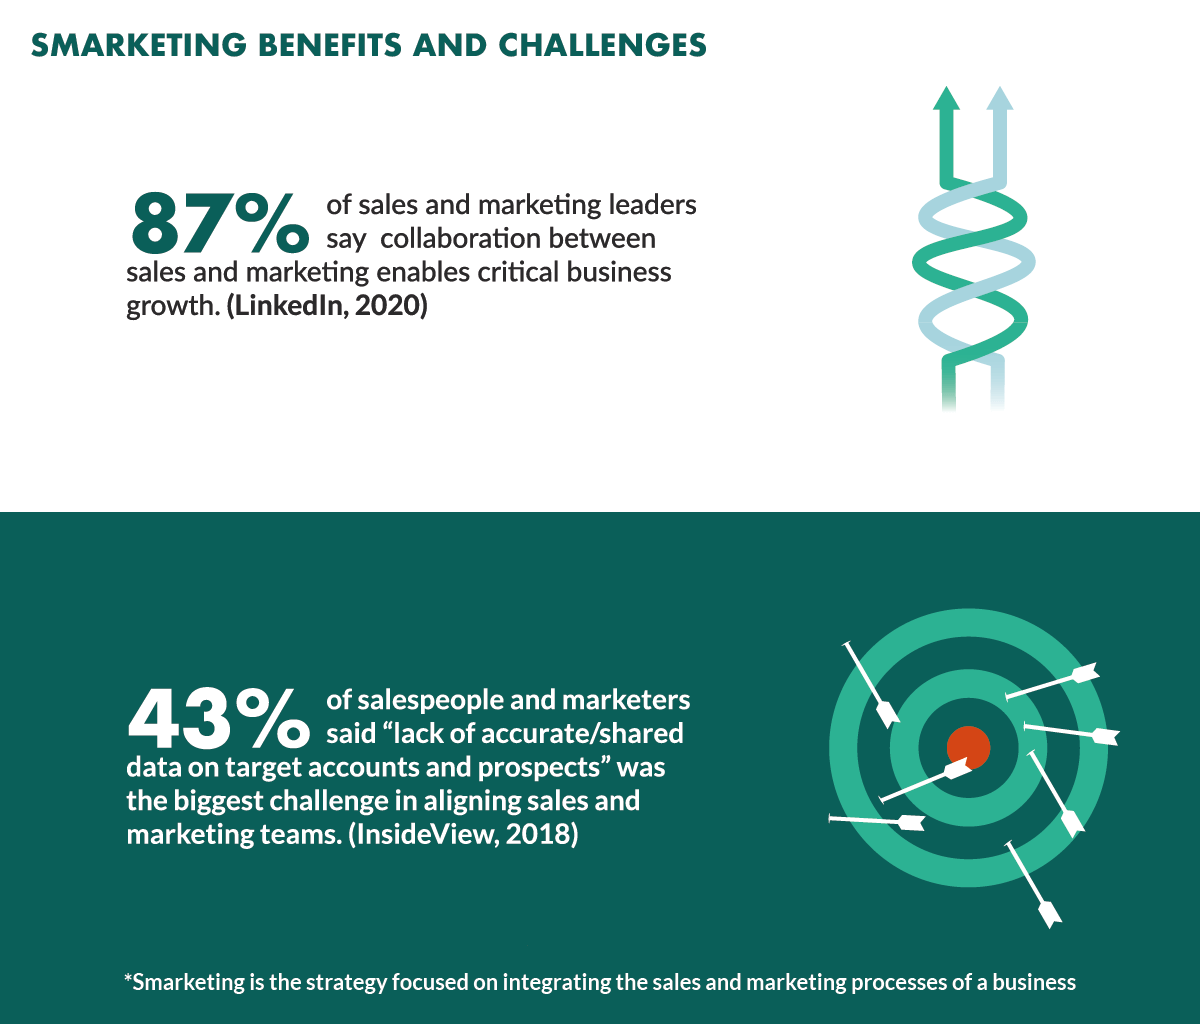 Smarketing benefits and challenges